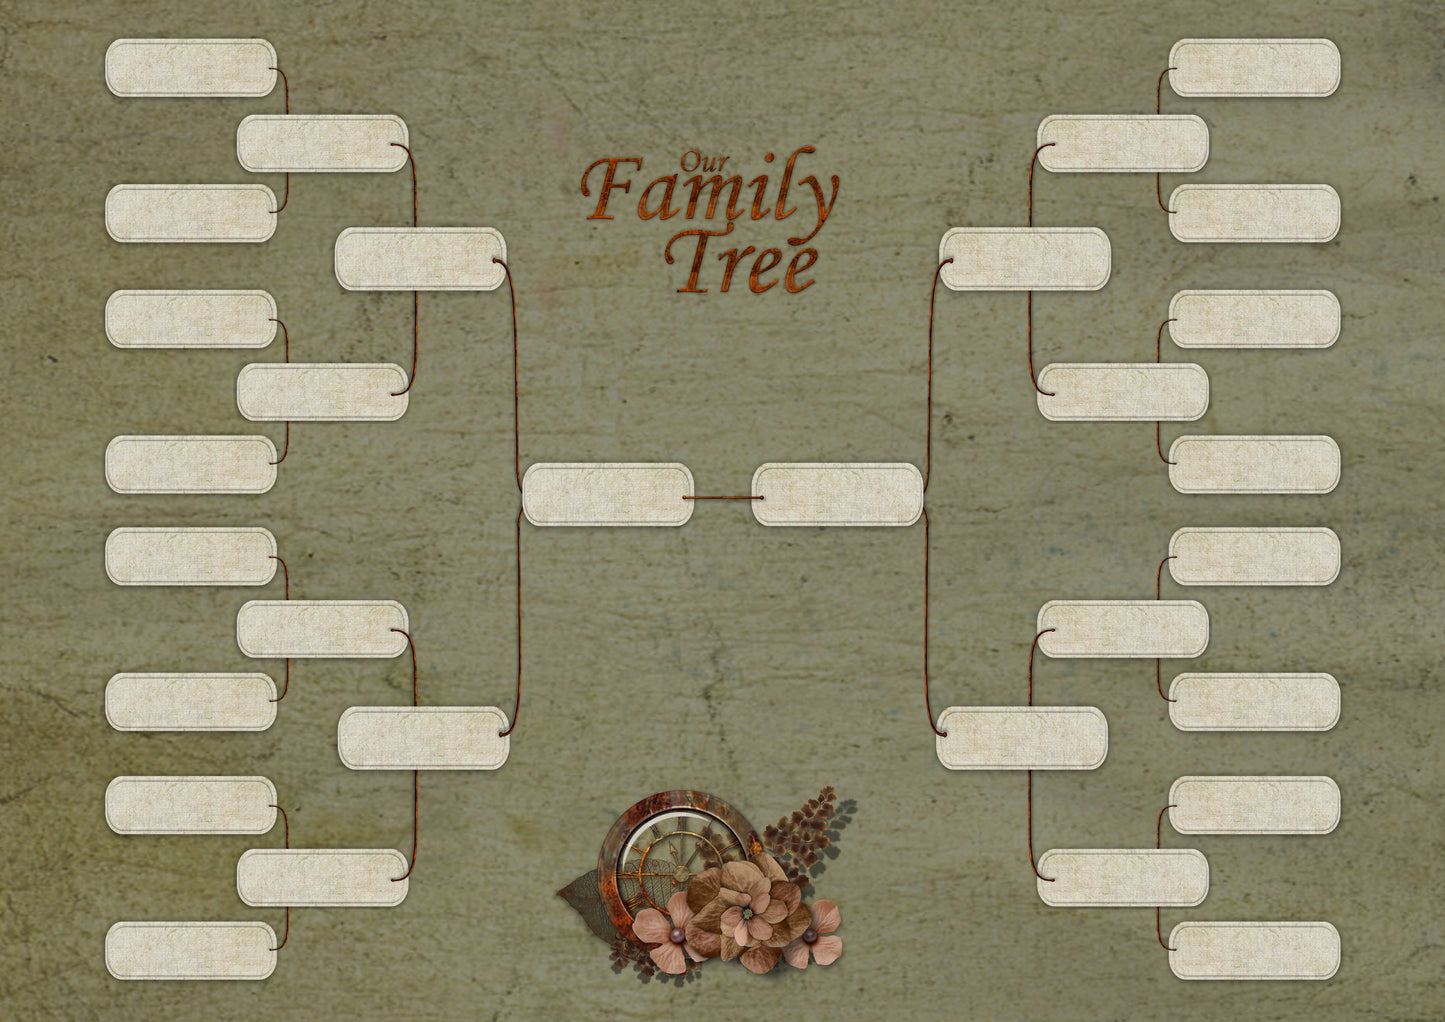 Traditional Family Tree – 4 Generations Paternal & Maternal